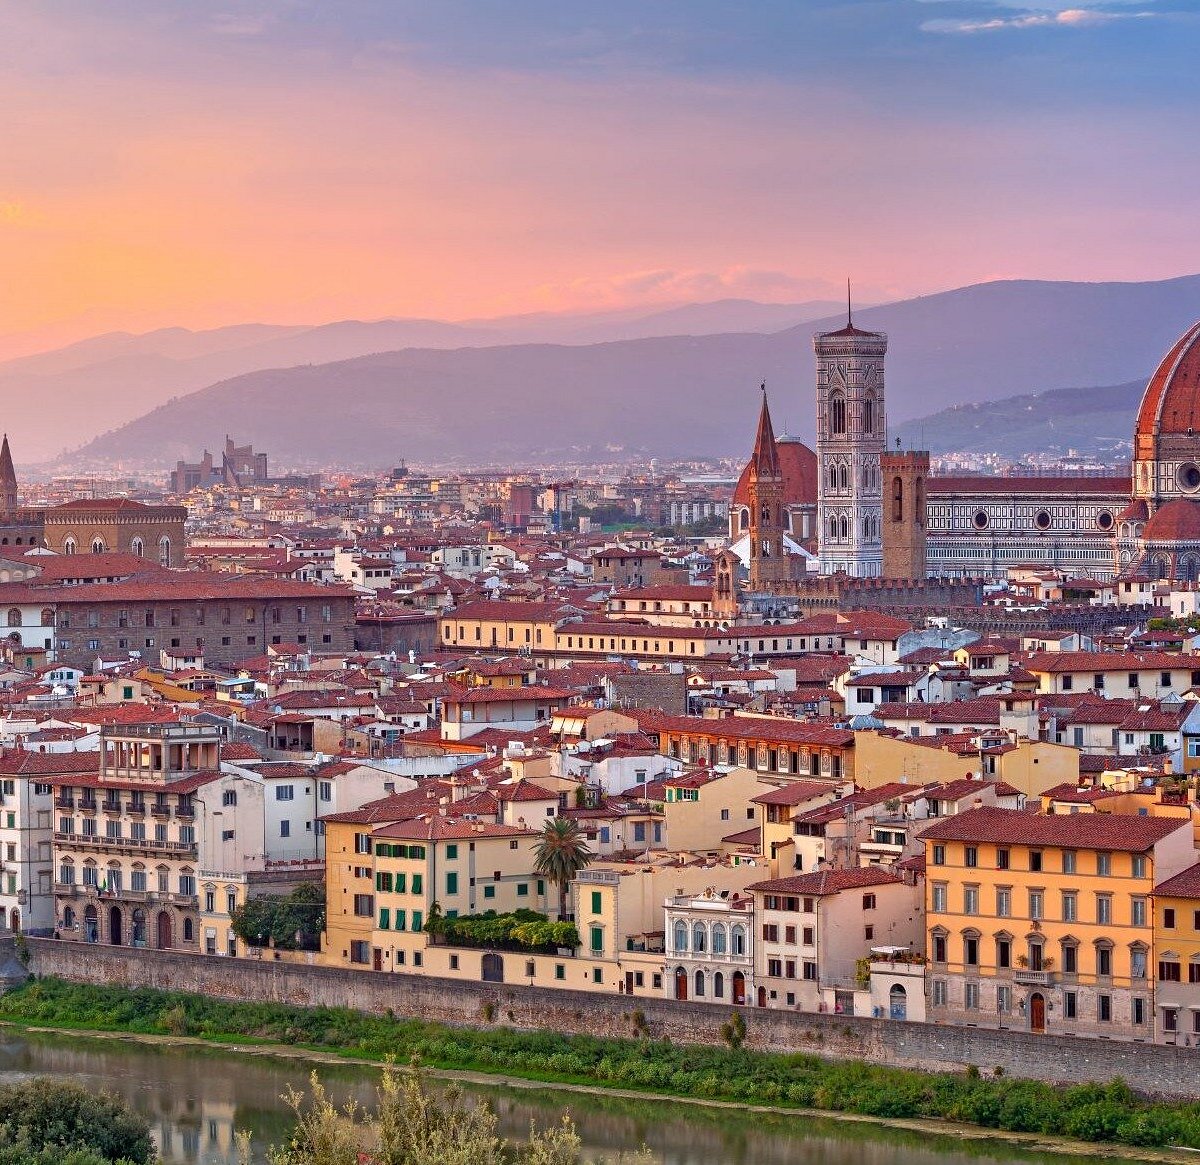 BINGE TOURS FLORENCE - All You Need to Know BEFORE You Go